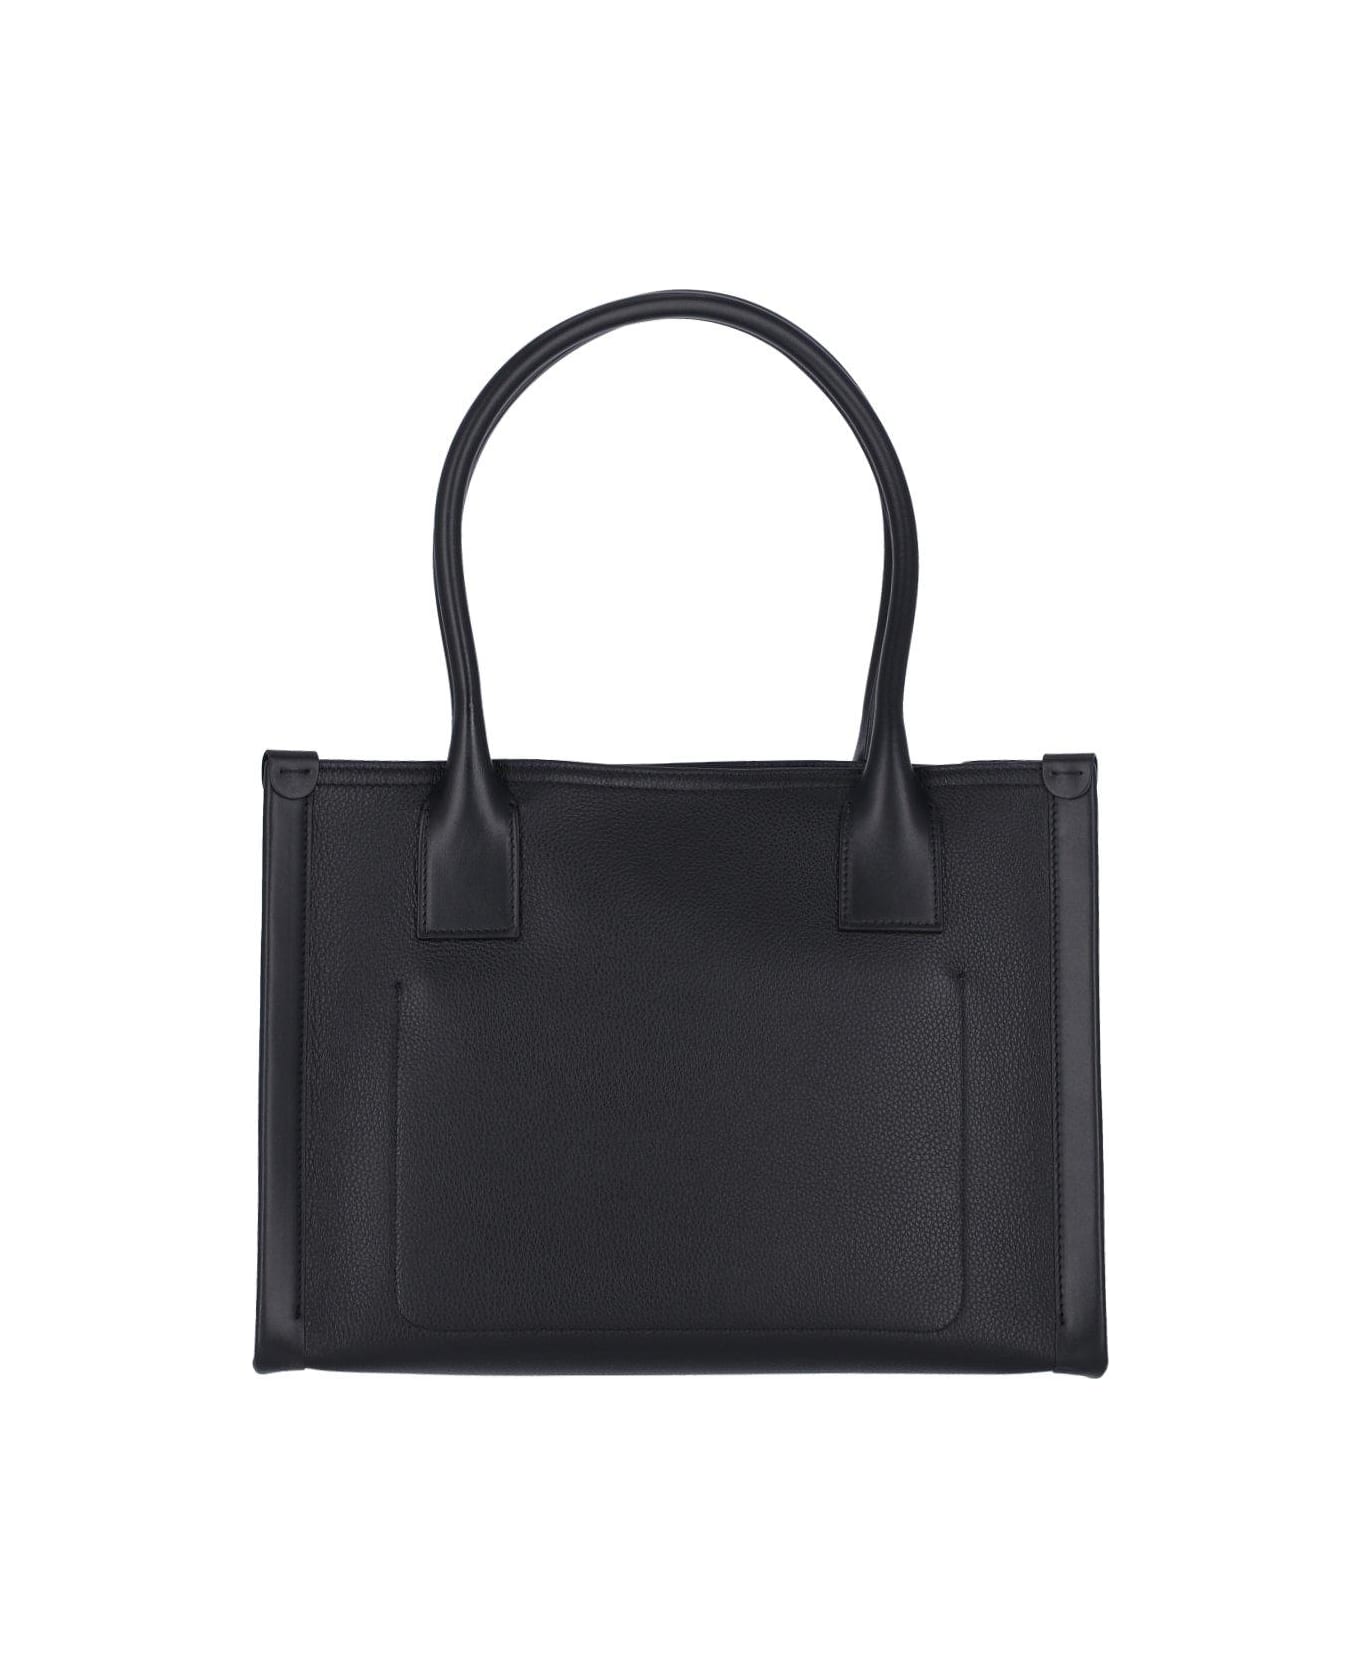 Christian Louboutin By My Side Small Tote Bag - Black/black/black